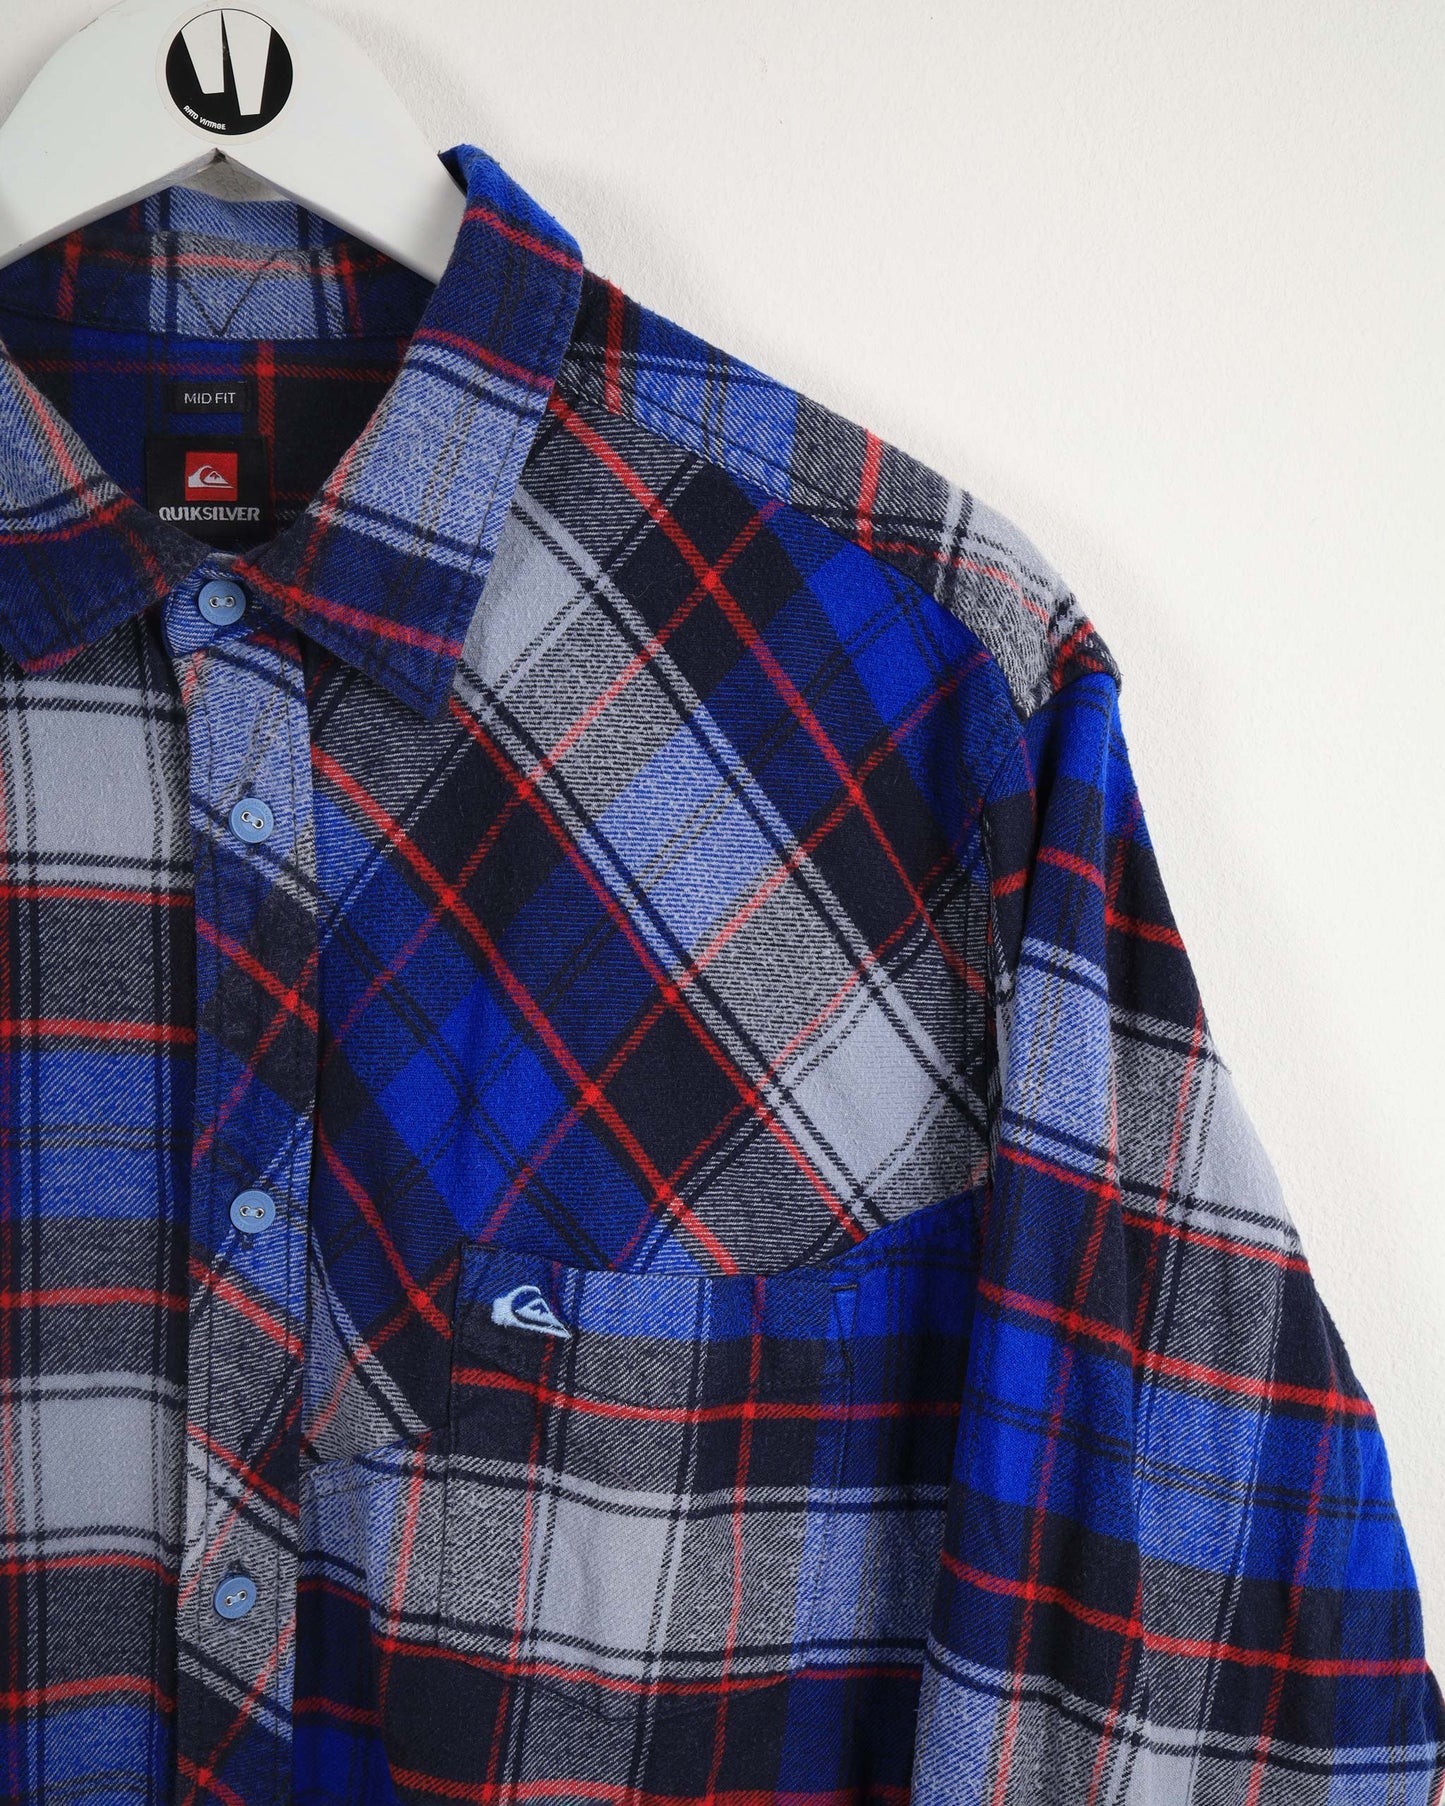 Vintage Quiksilver Checked Flannel Long Sleeve Shirt